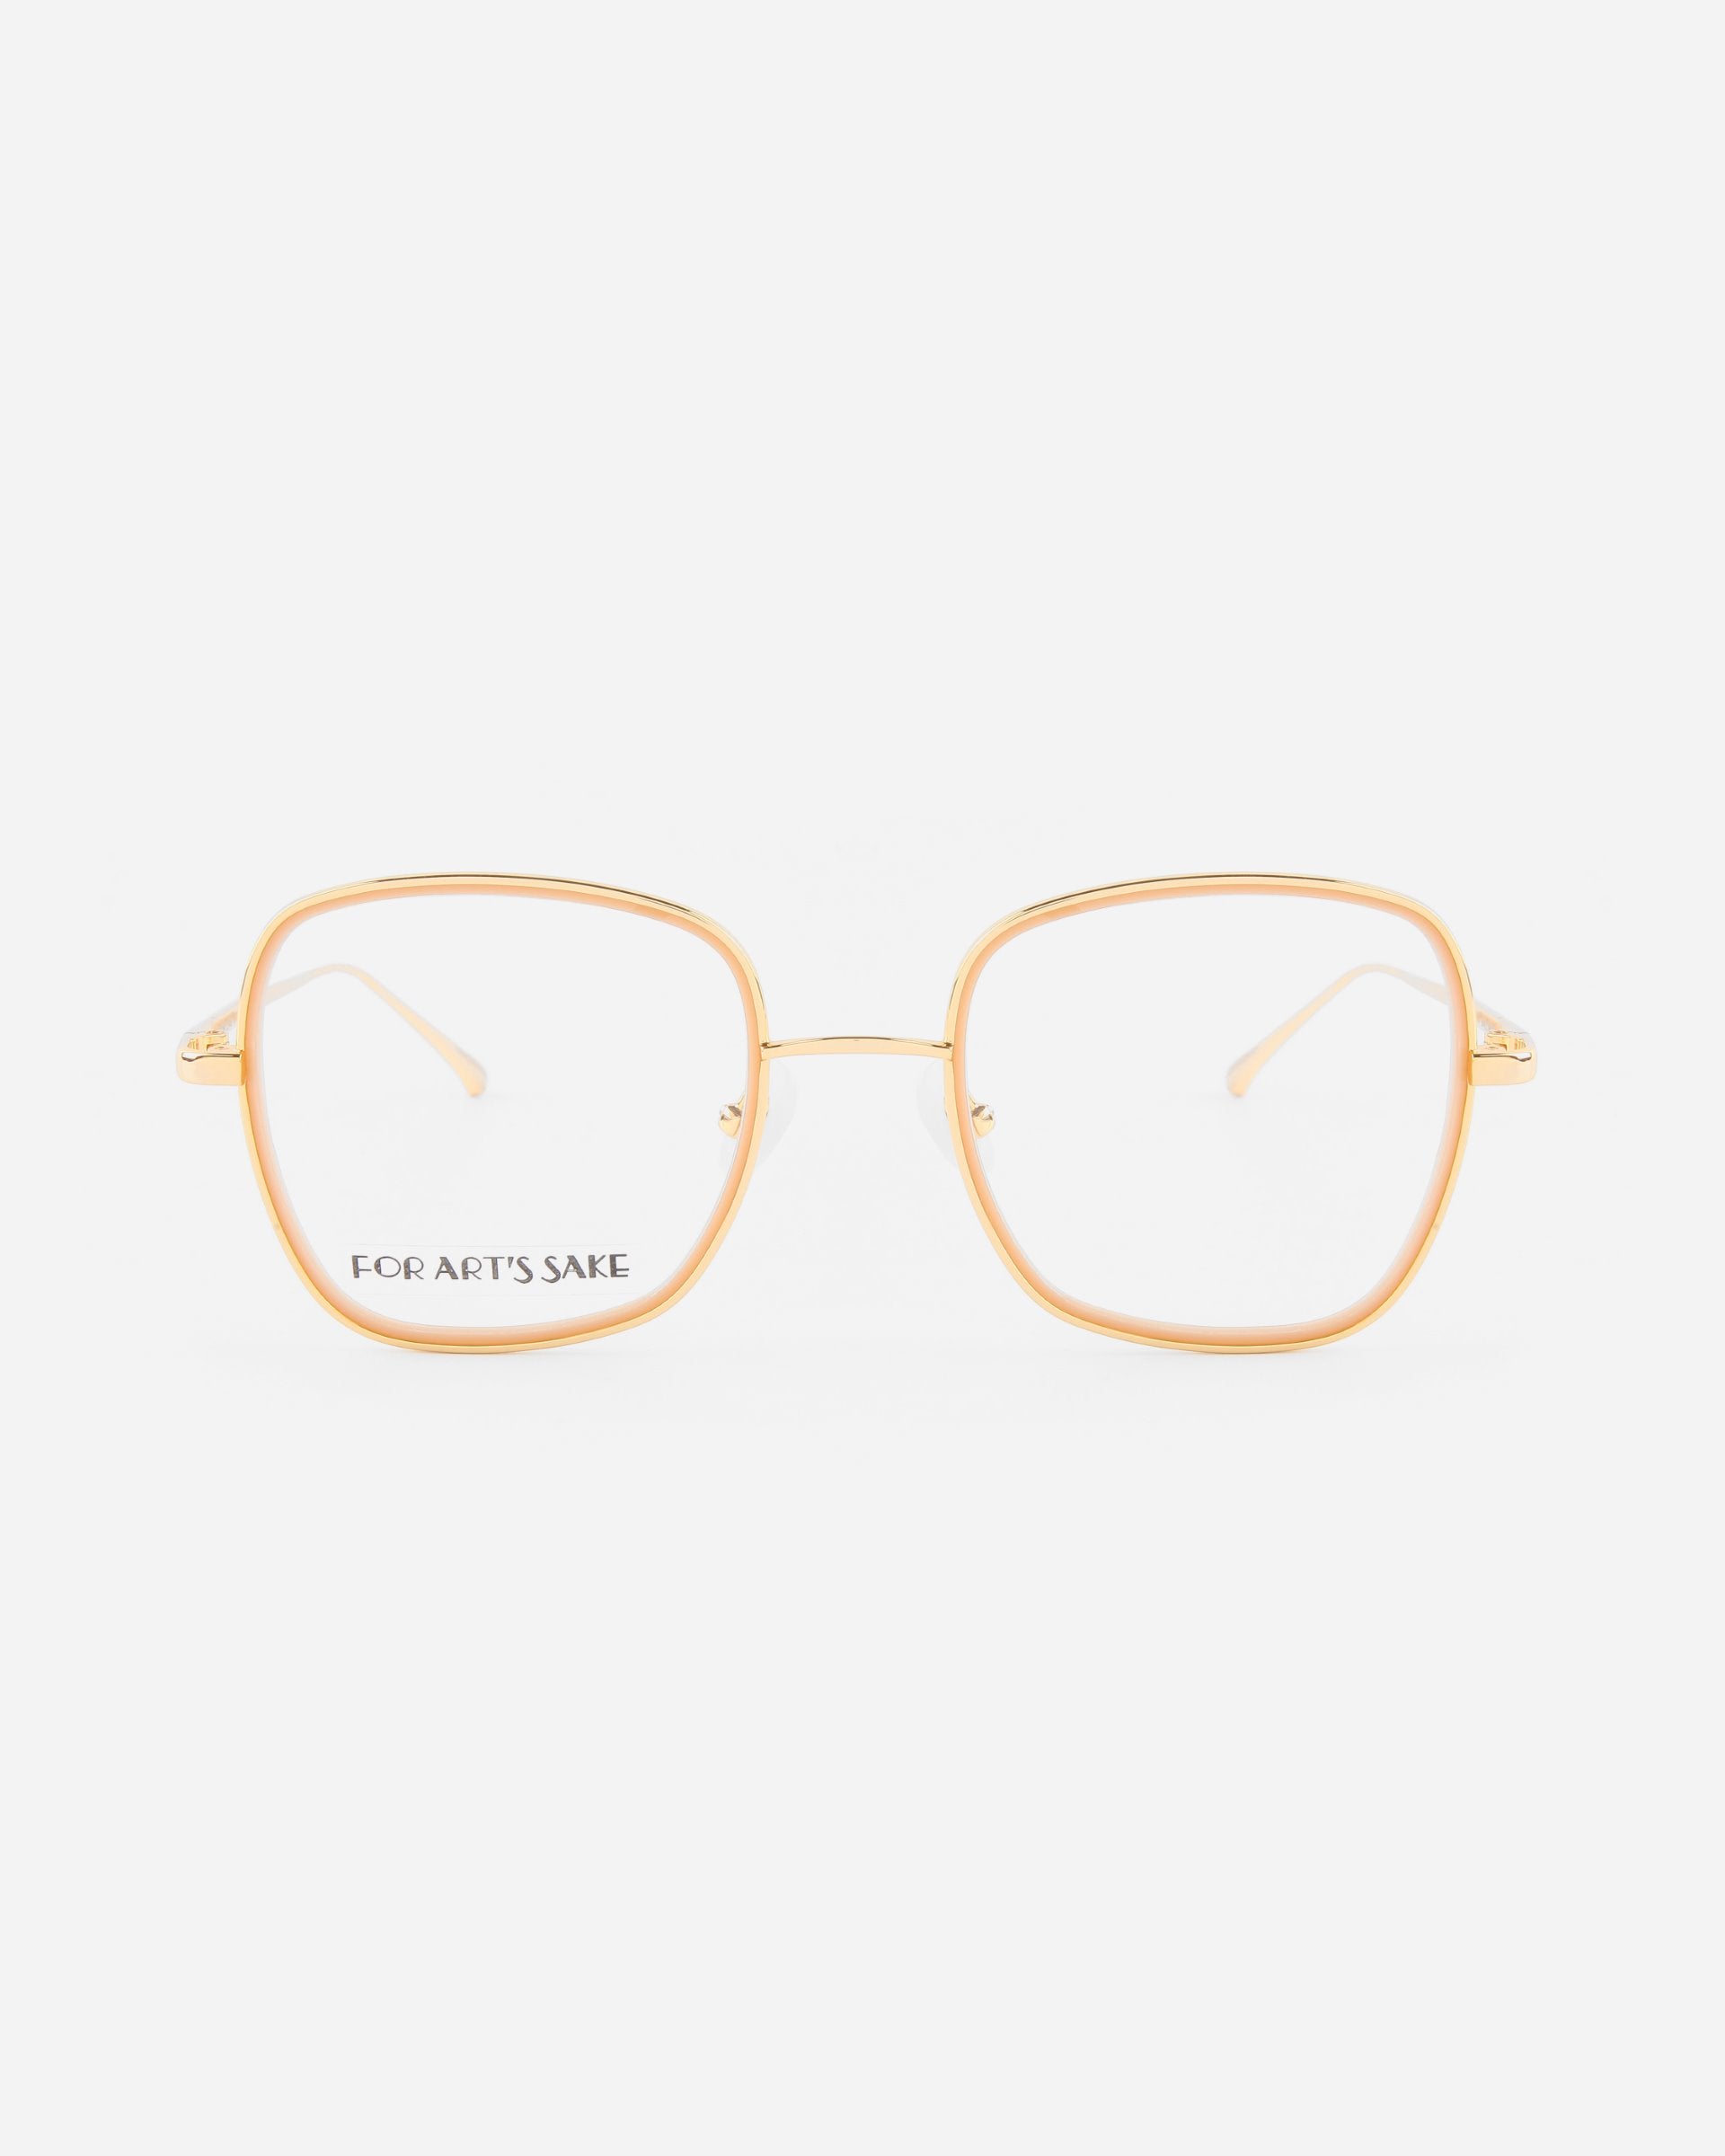 A pair of 18-karat gold-plated eyeglasses with large, slightly rounded square lenses. The frame is thin and elegant, with transparent nose pads. The inside of the left lens is printed with the words &quot;FOR ARTS SAKE.&quot; These stylish Coconut eyeglasses by For Art&#39;s Sake® also come with a Blue Light Filter for added comfort.